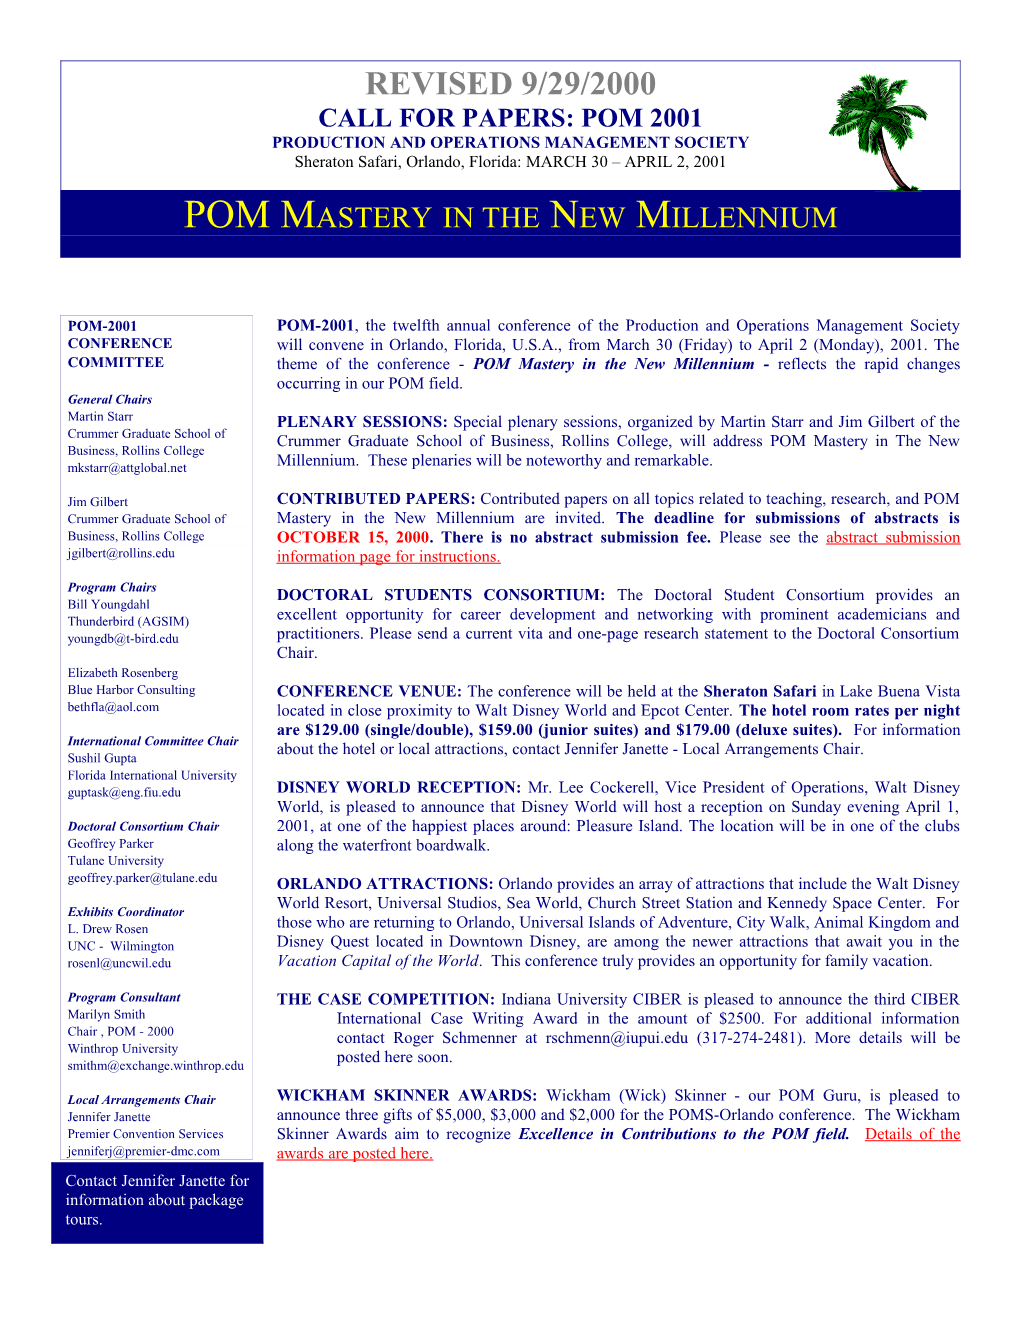 POM-2001, the Twelfth Annual Conference of the Production and Operations Management Society